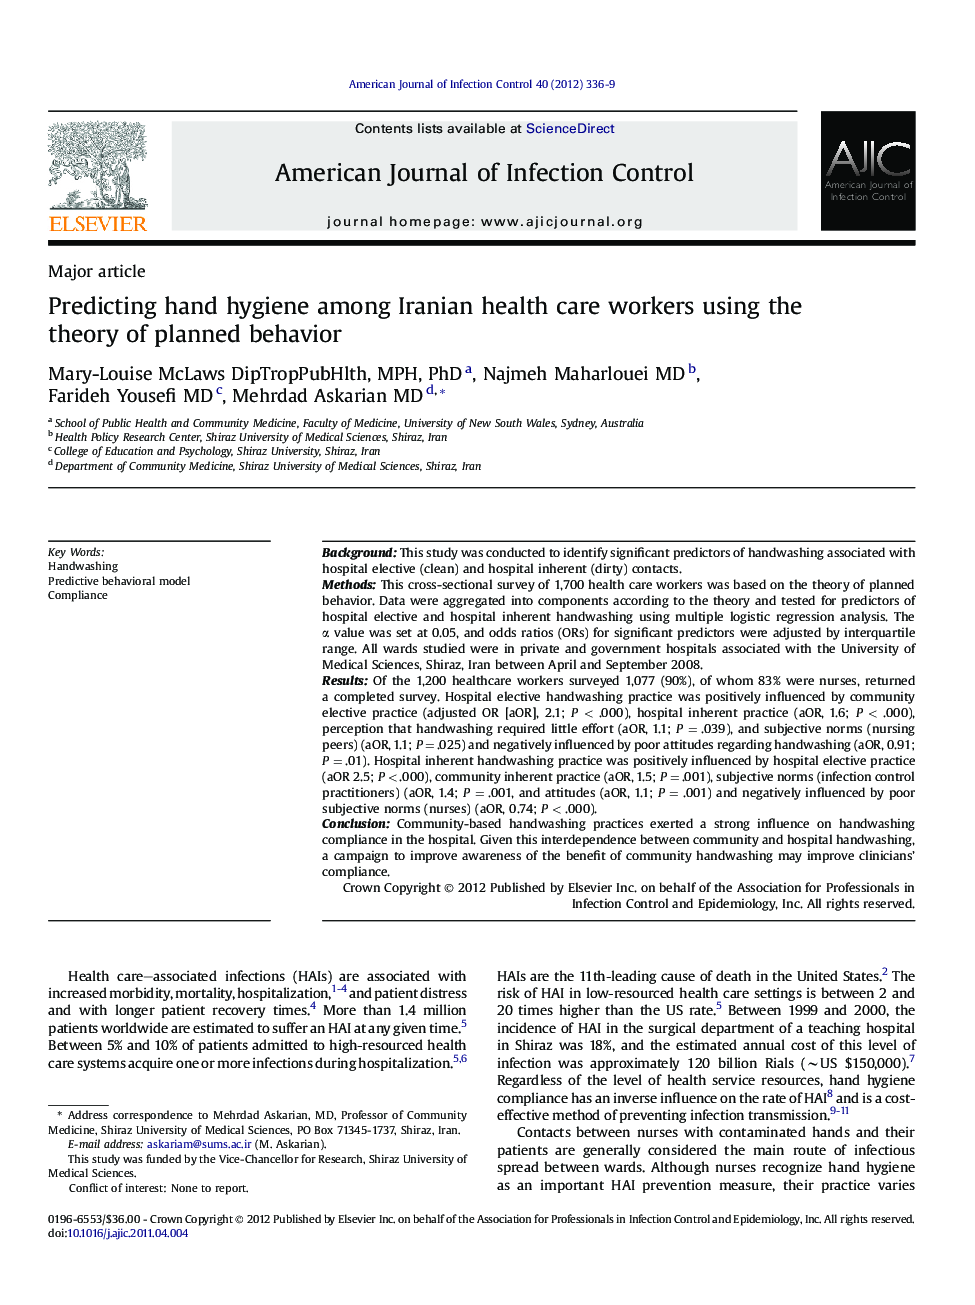 Predicting hand hygiene among Iranian health care workers using the theory of planned behavior 